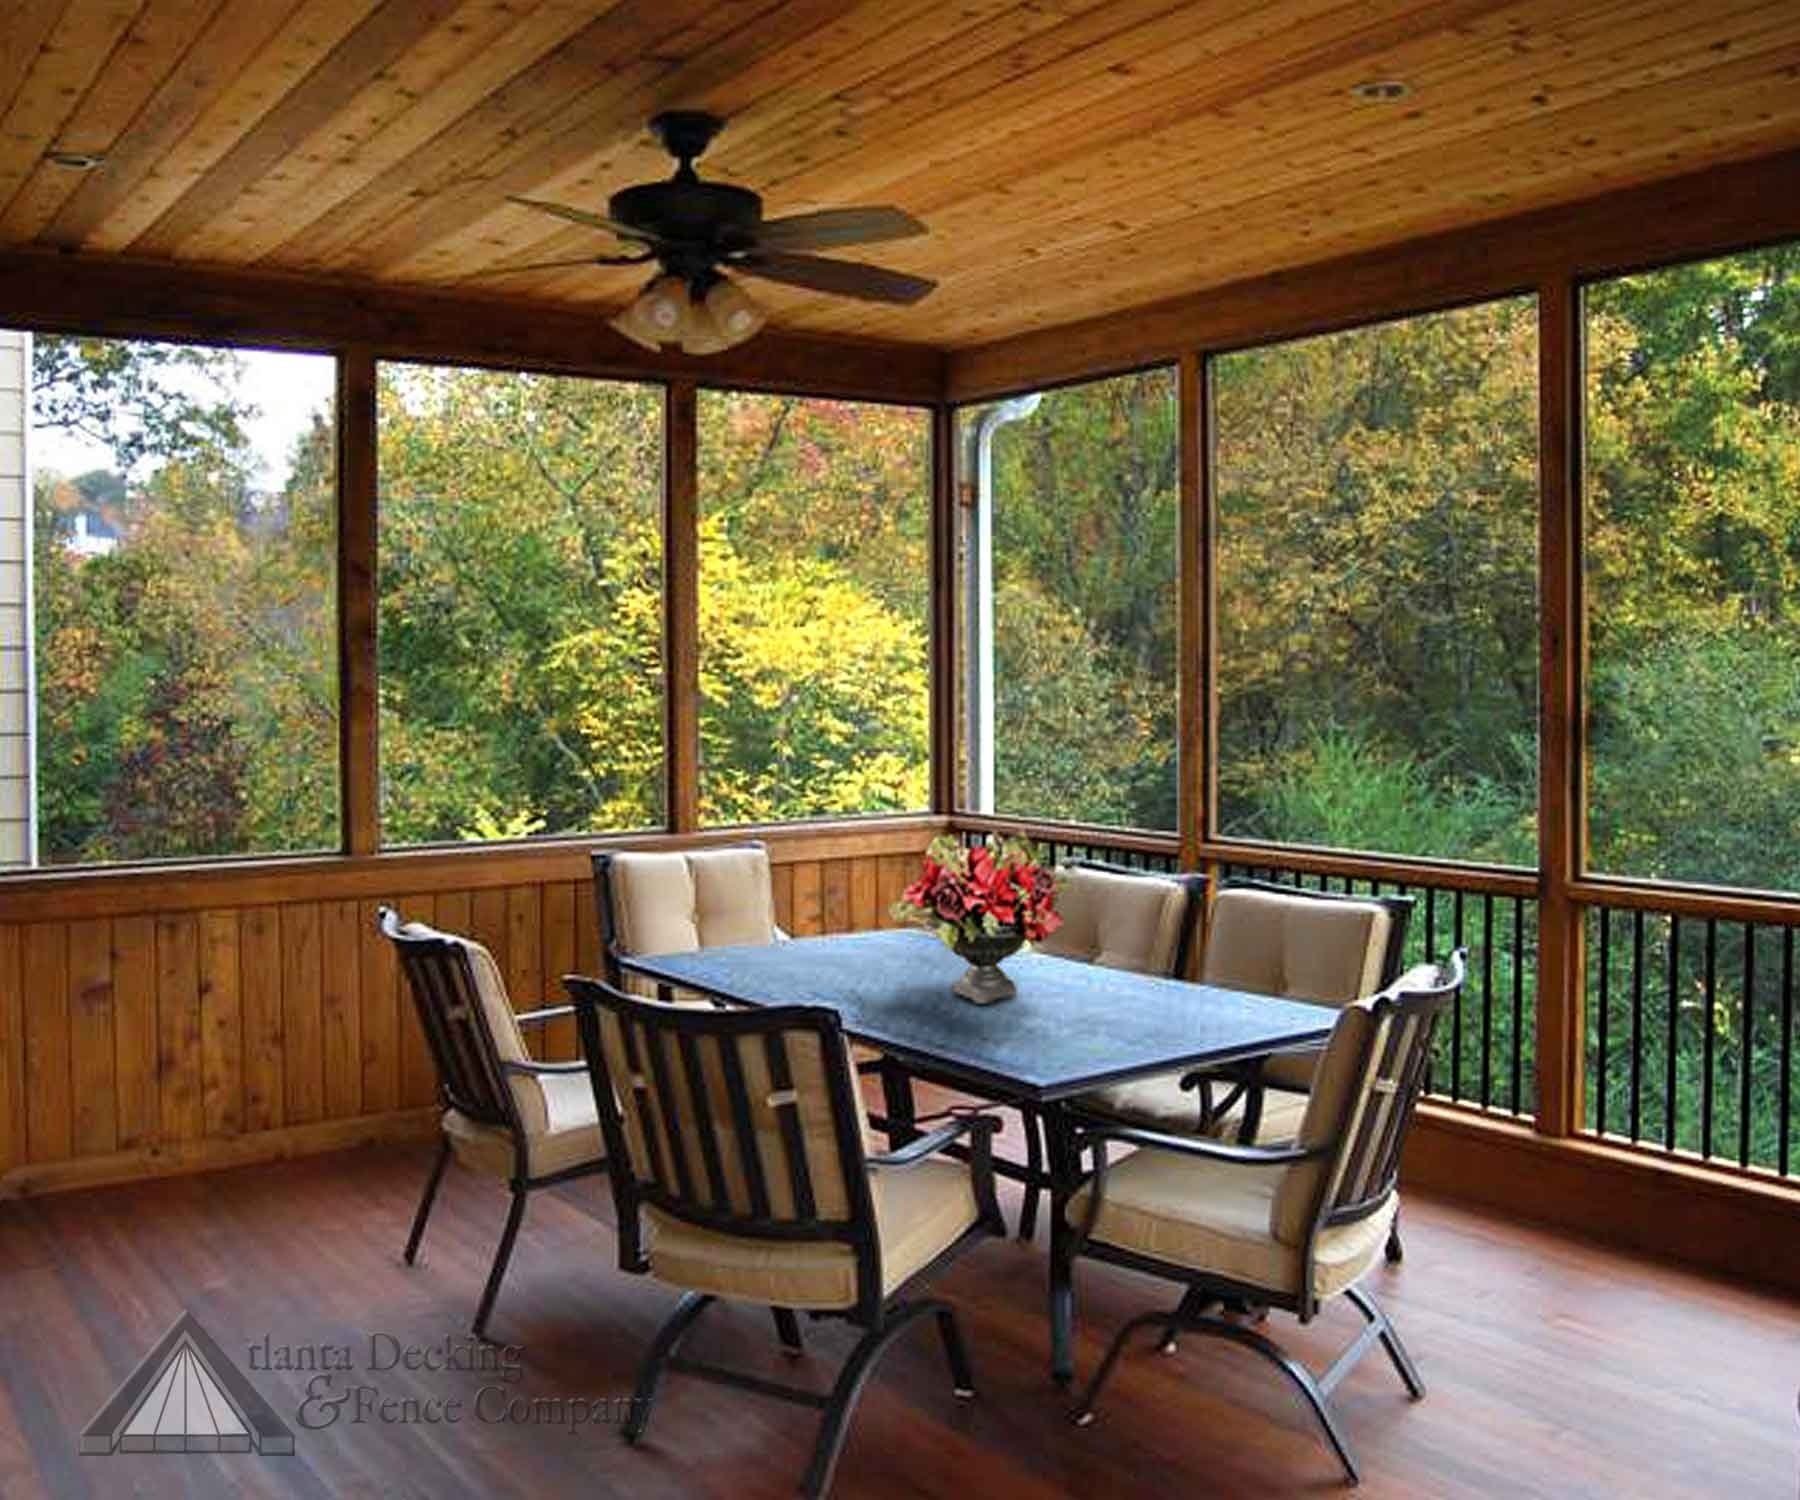 10 Most Recommended Screened In Porch Design Ideas fine looking dining set for 6 on wooden floors as well as screen 2022